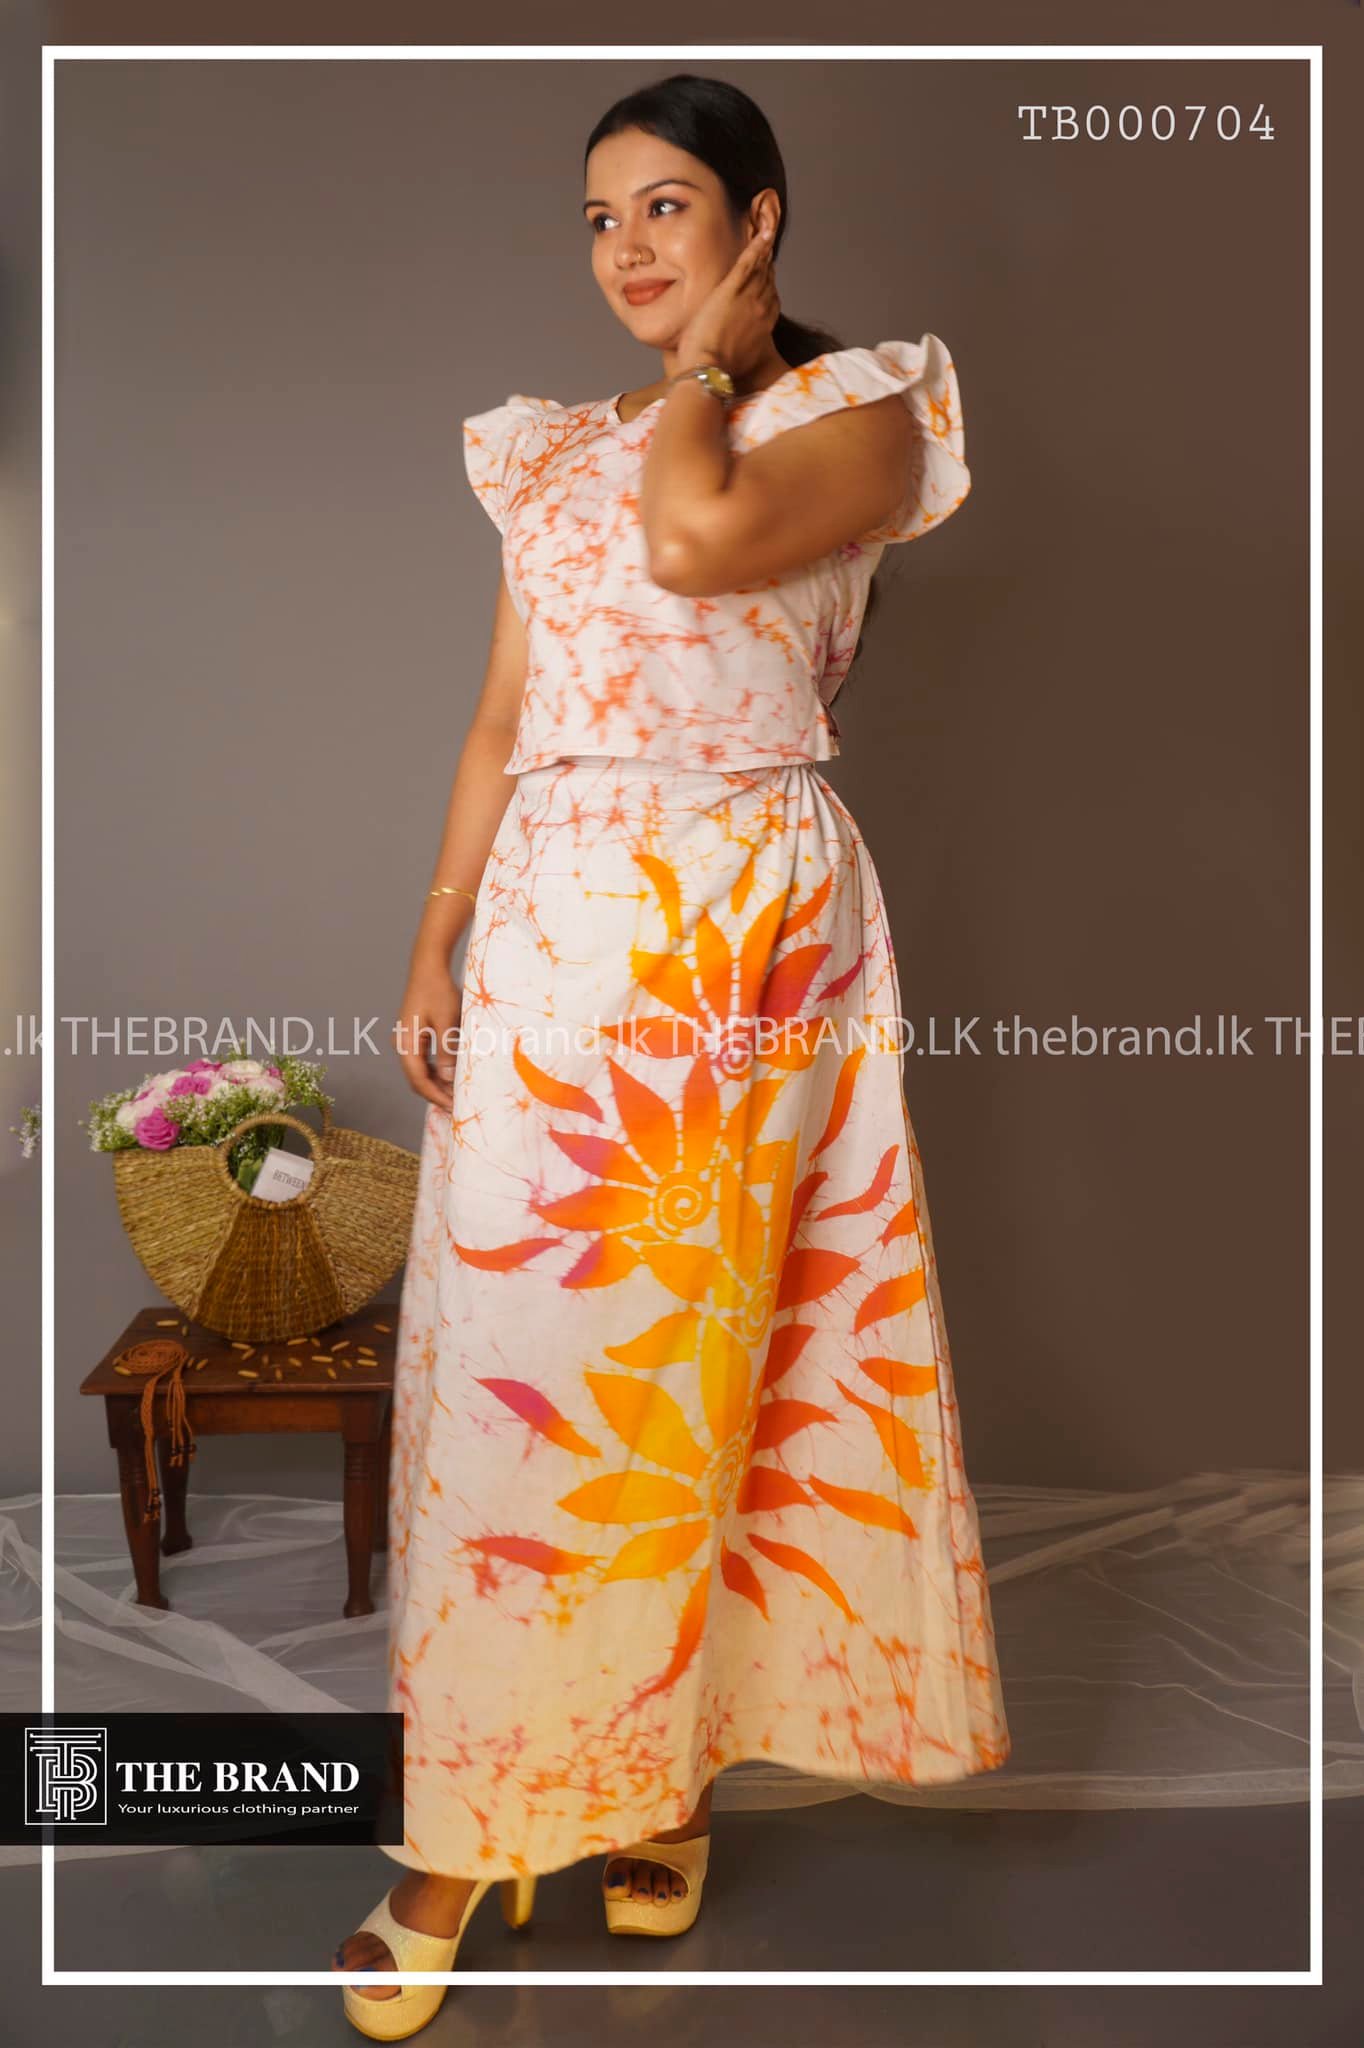 The brand mulicolour batik Skirt and blouse 1